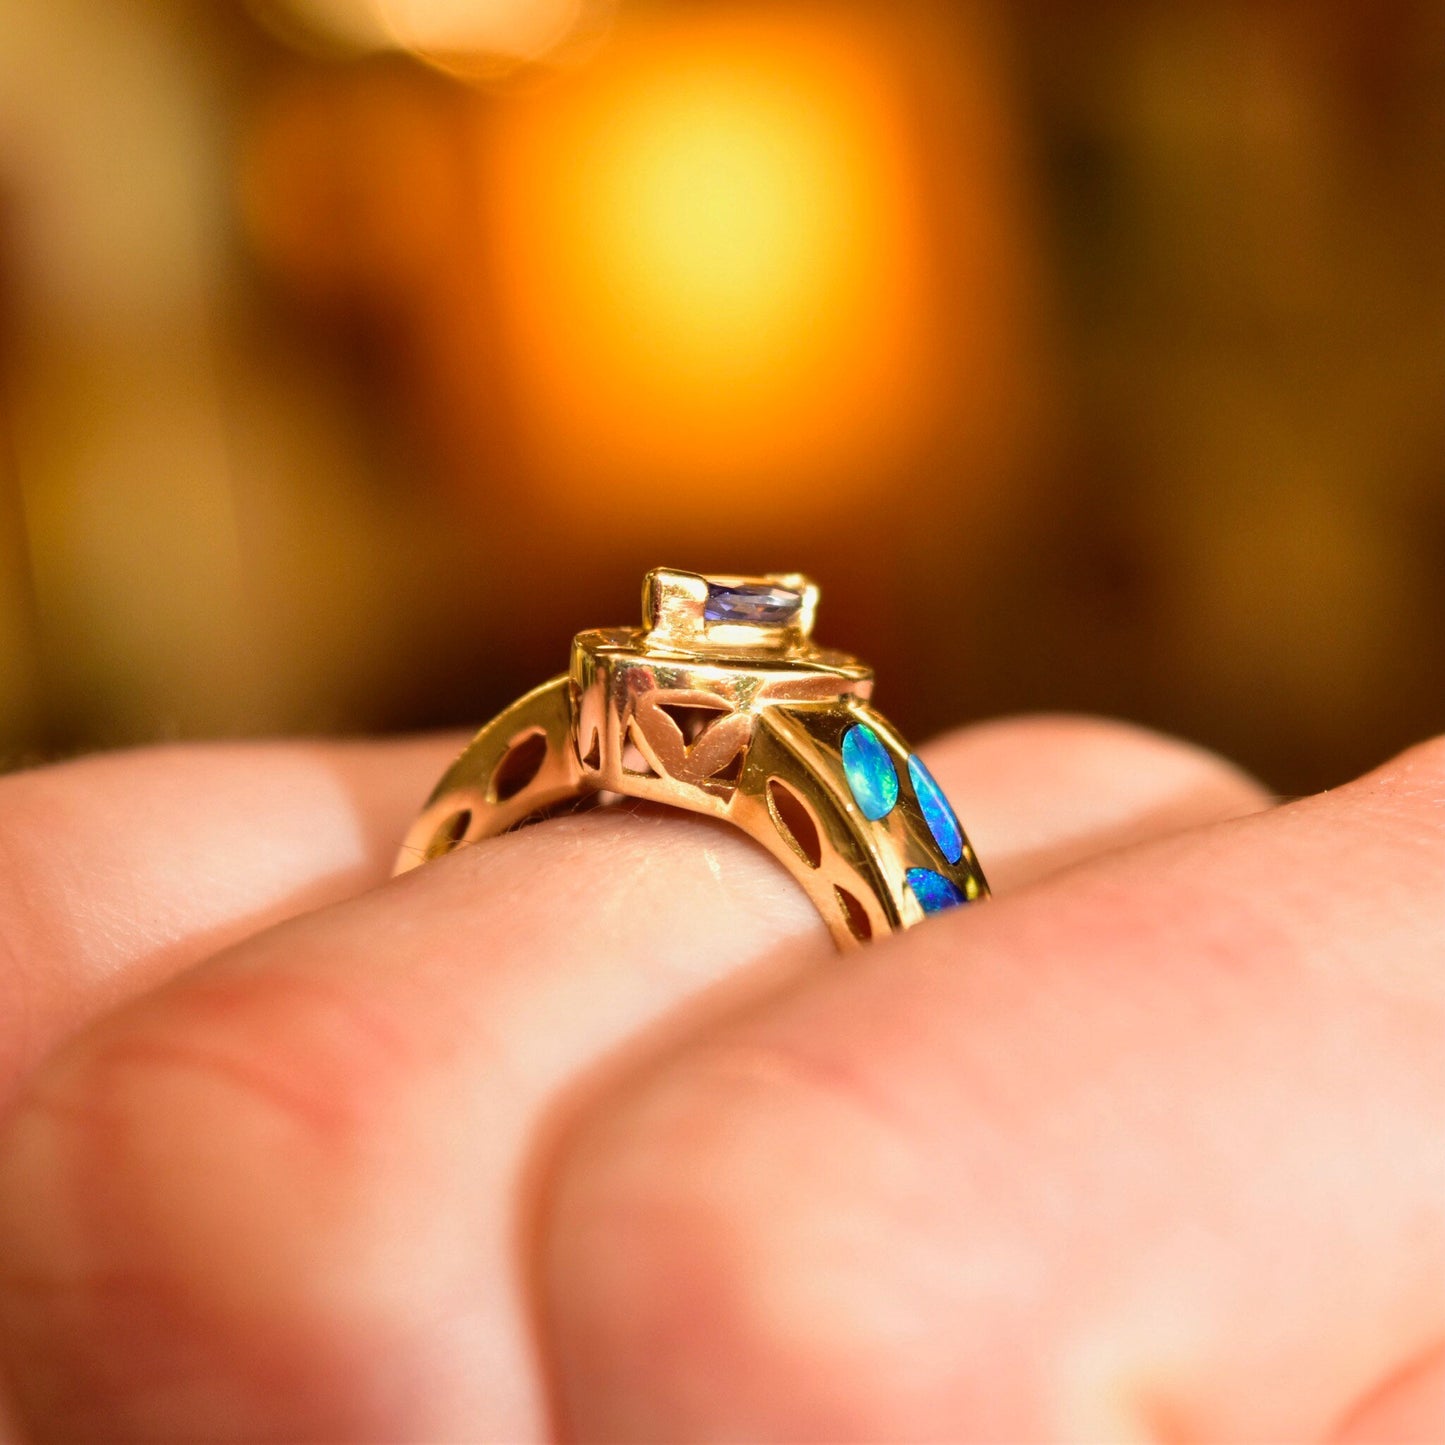 14K gold ring with marquise tanzanite center stone surrounded by diamond halo, featuring blue opal inlay on the band, resting on a person's hand, illuminated by warm lighting in a close-up view